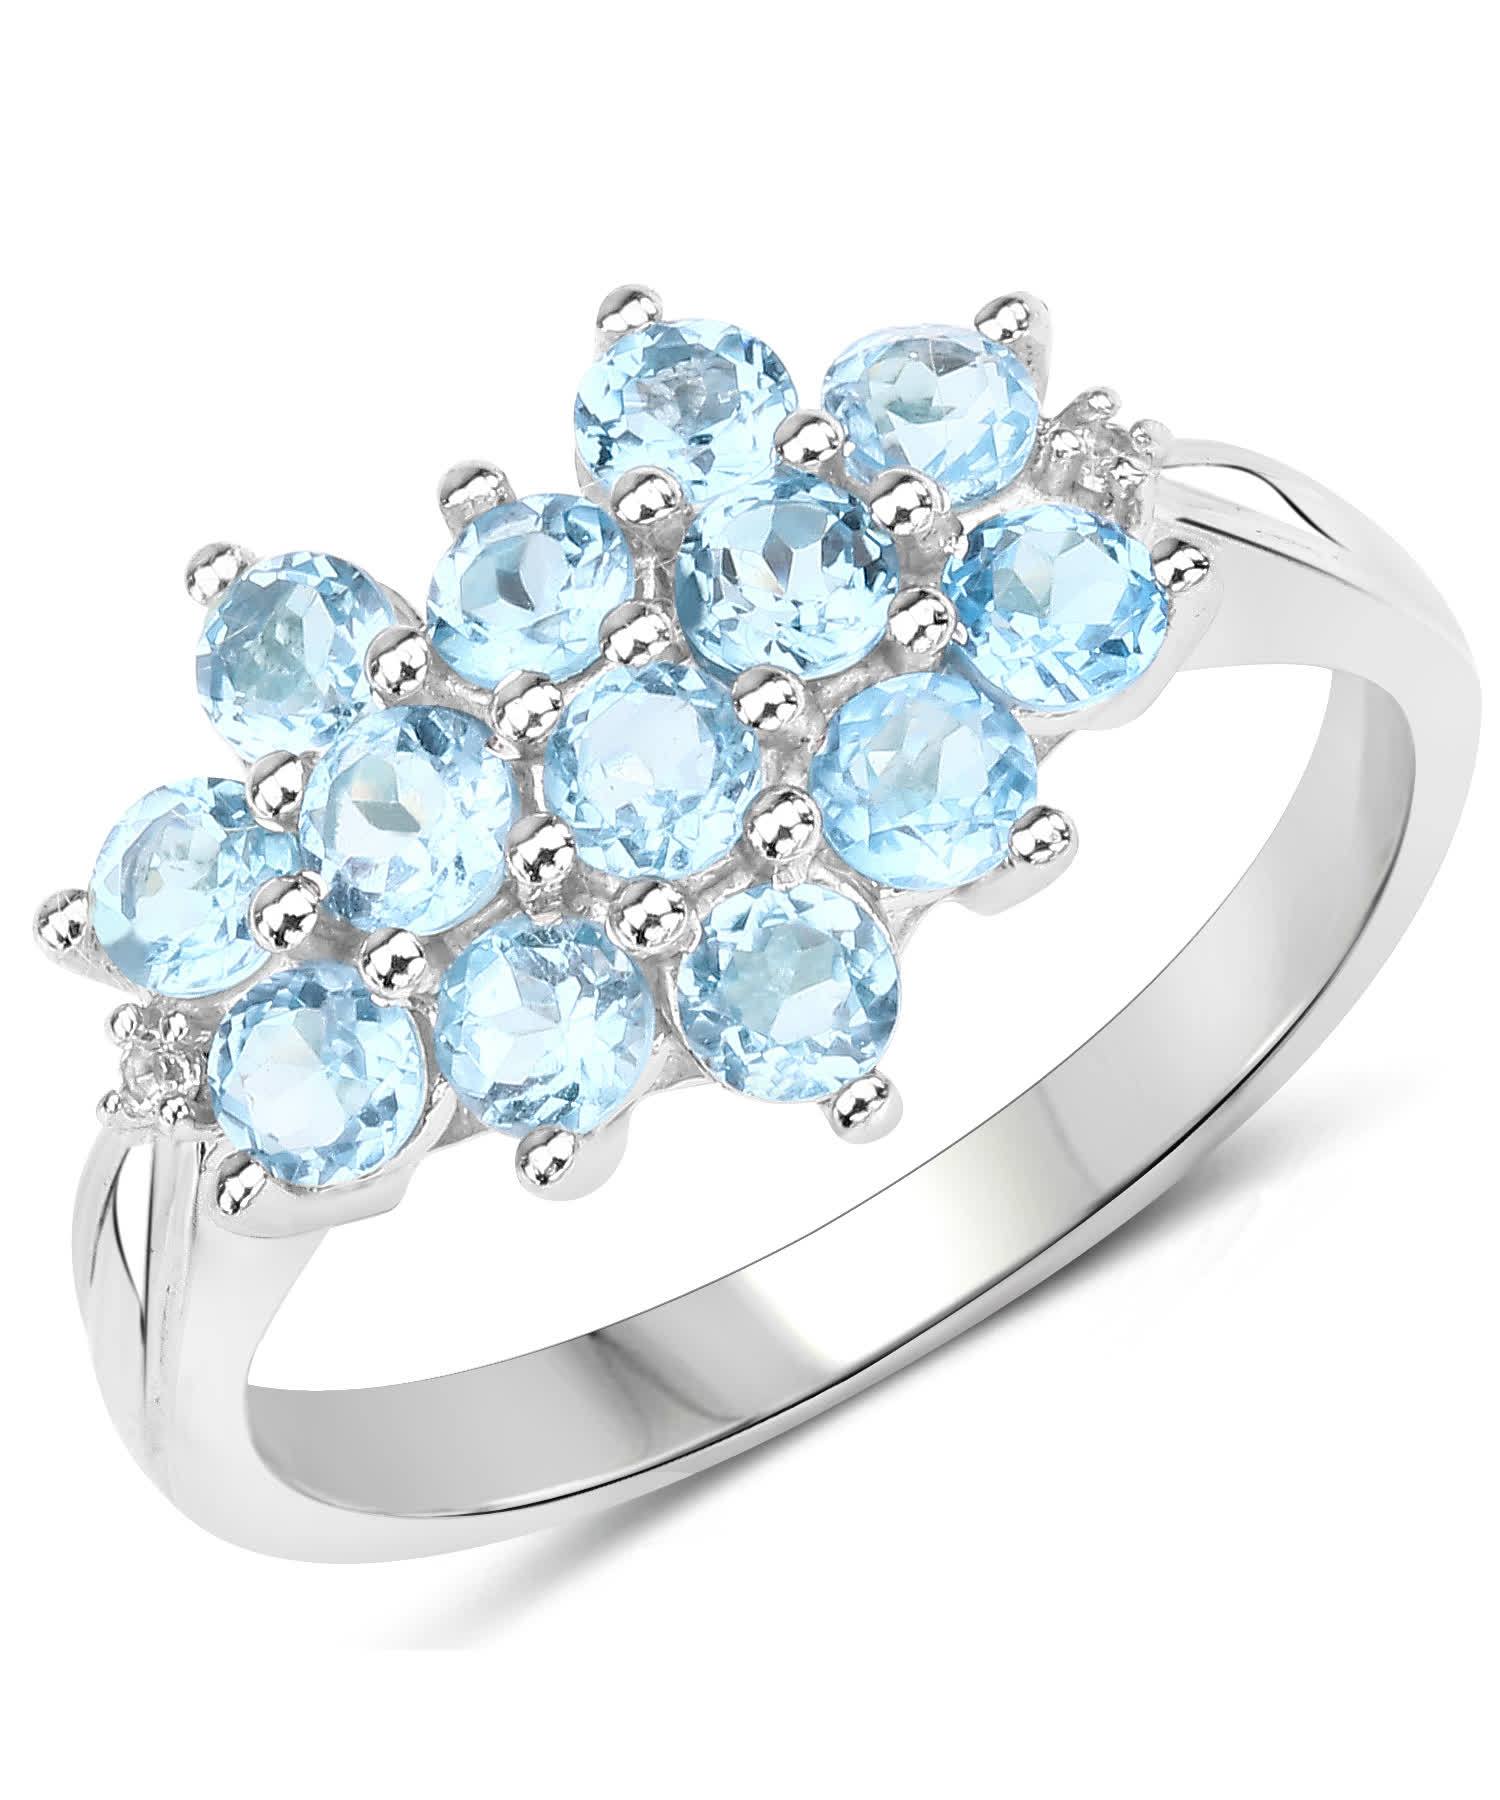 1.32ctw Natural Swiss Blue Topaz Rhodium Plated 925 Sterling Silver Cluster Ring View 1